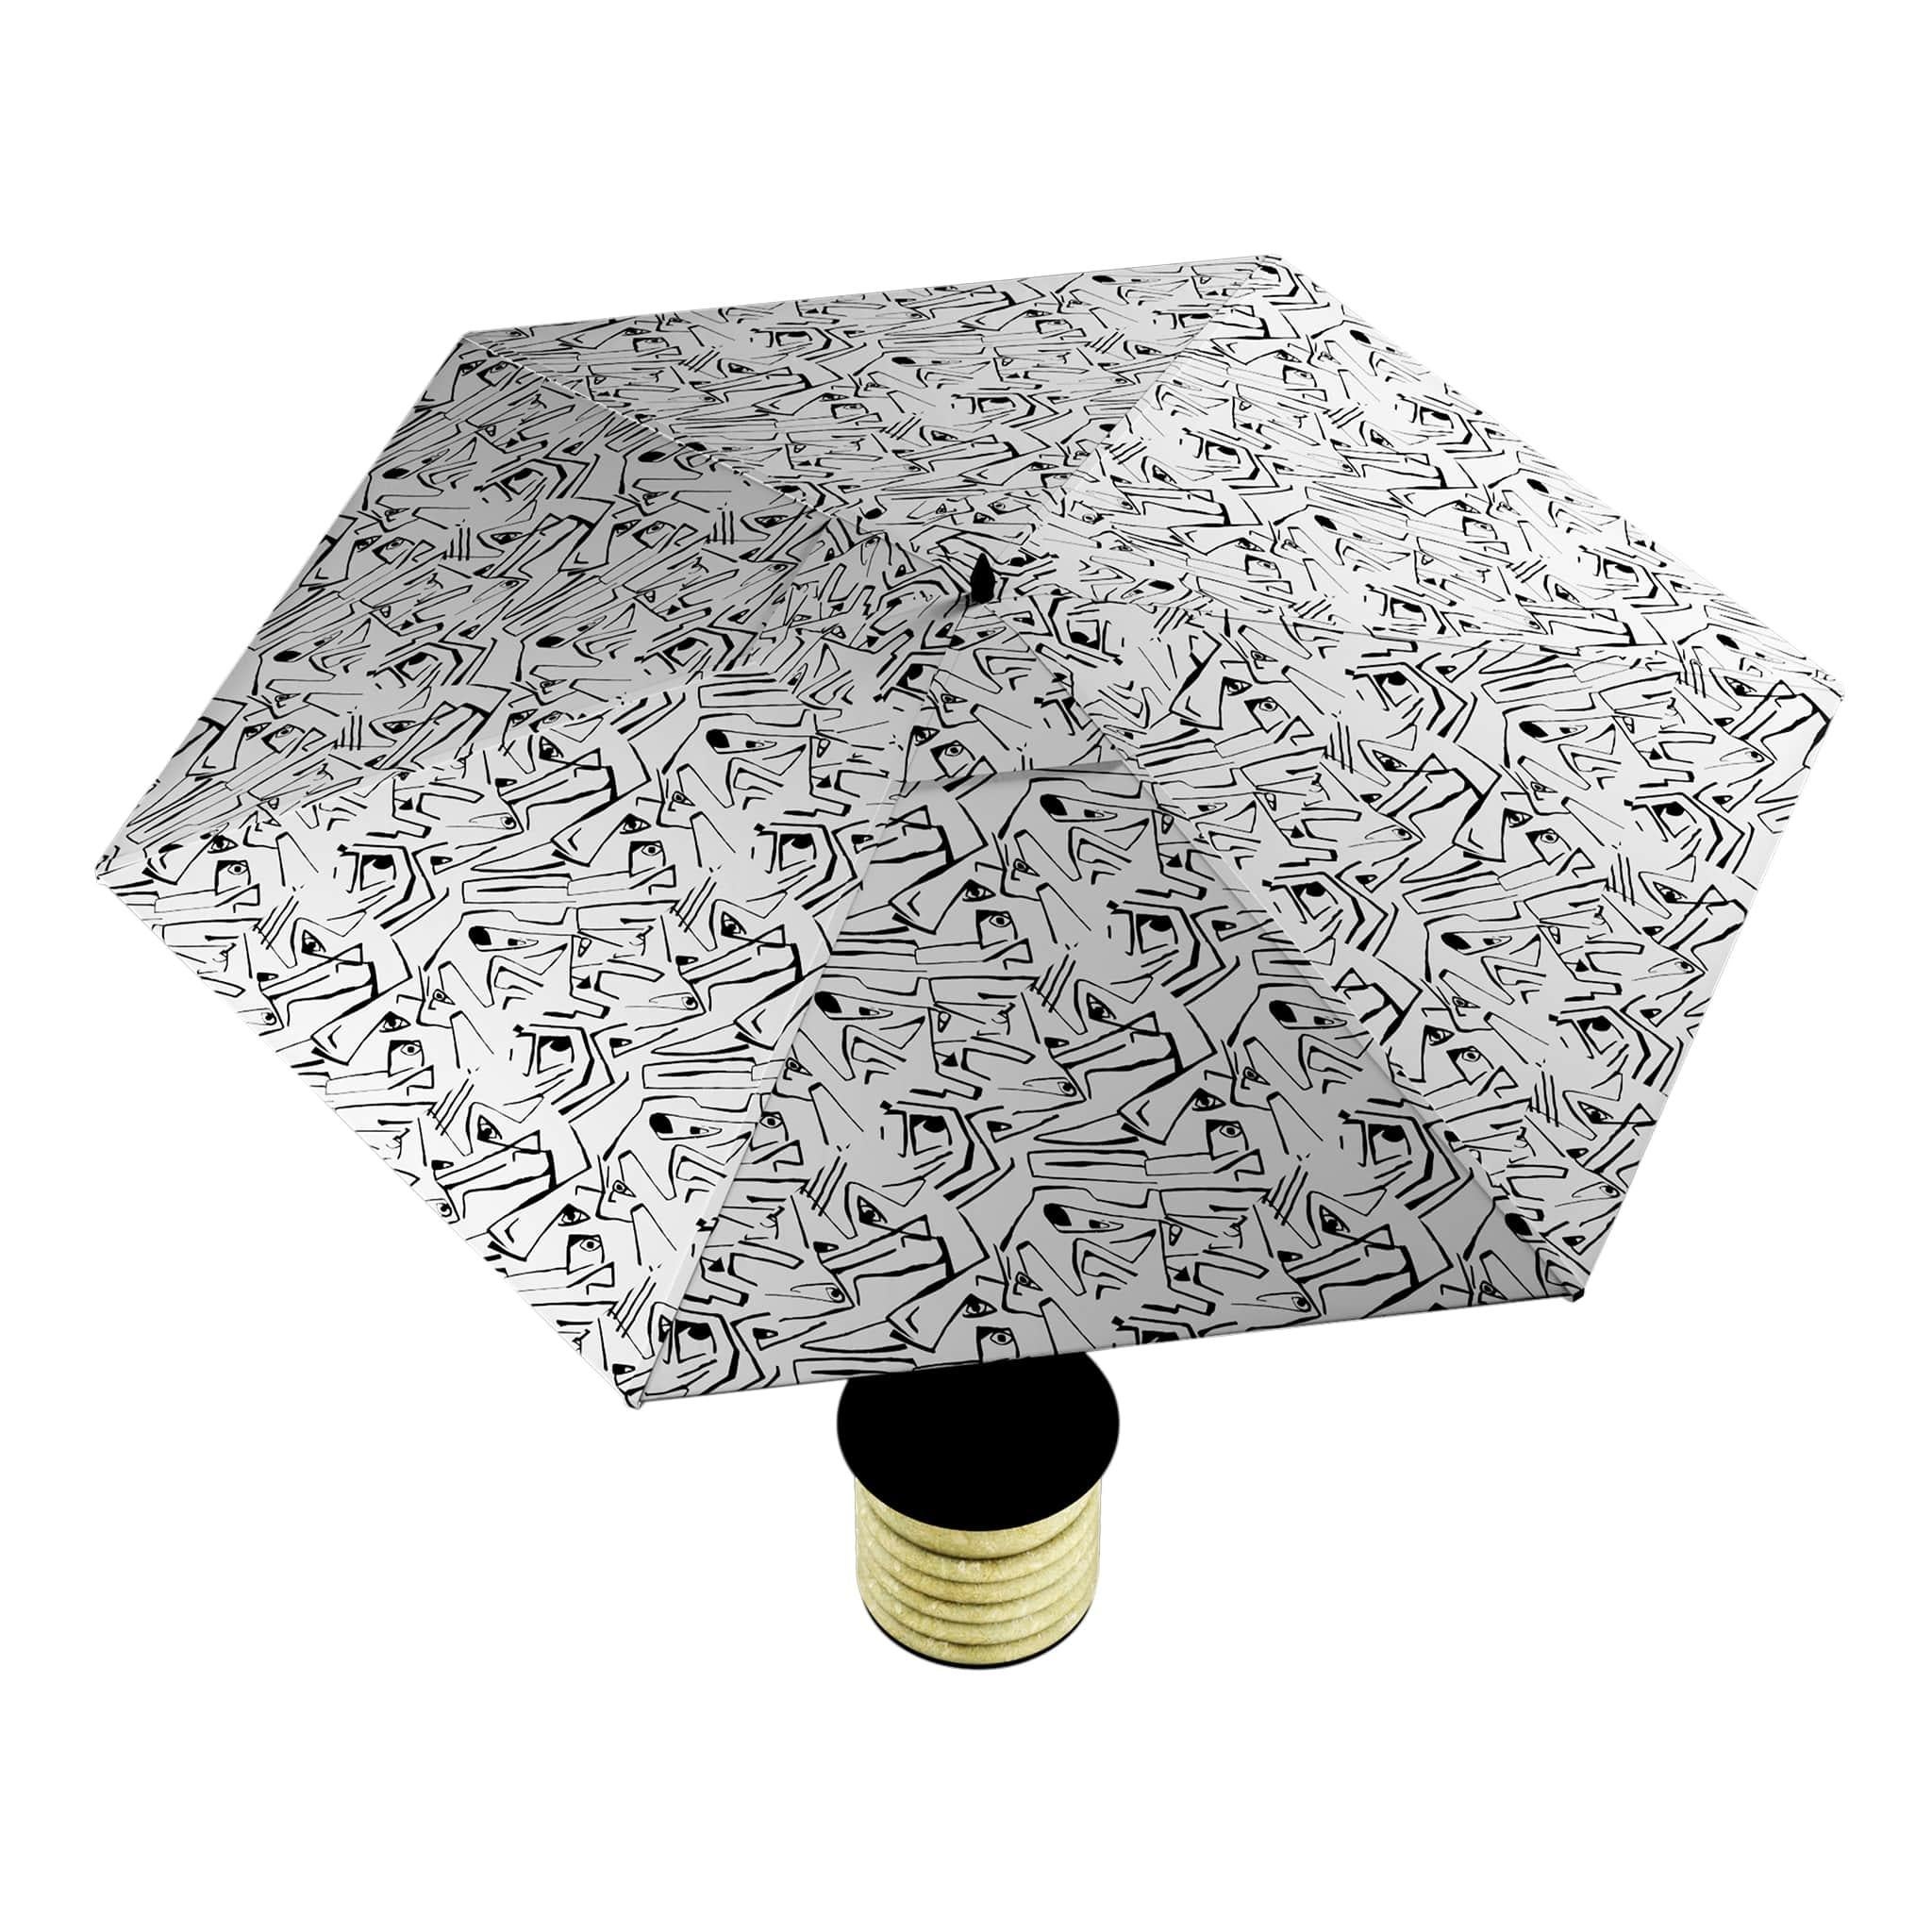 Contemporary black&white parasol & base with outdoor fabric, body in green marble

Elektra Parasol Black & White is a luxury sombrilla, designed for contemporary outdoor designs. A multifunctional parasol in Travertine and nero marquina marble